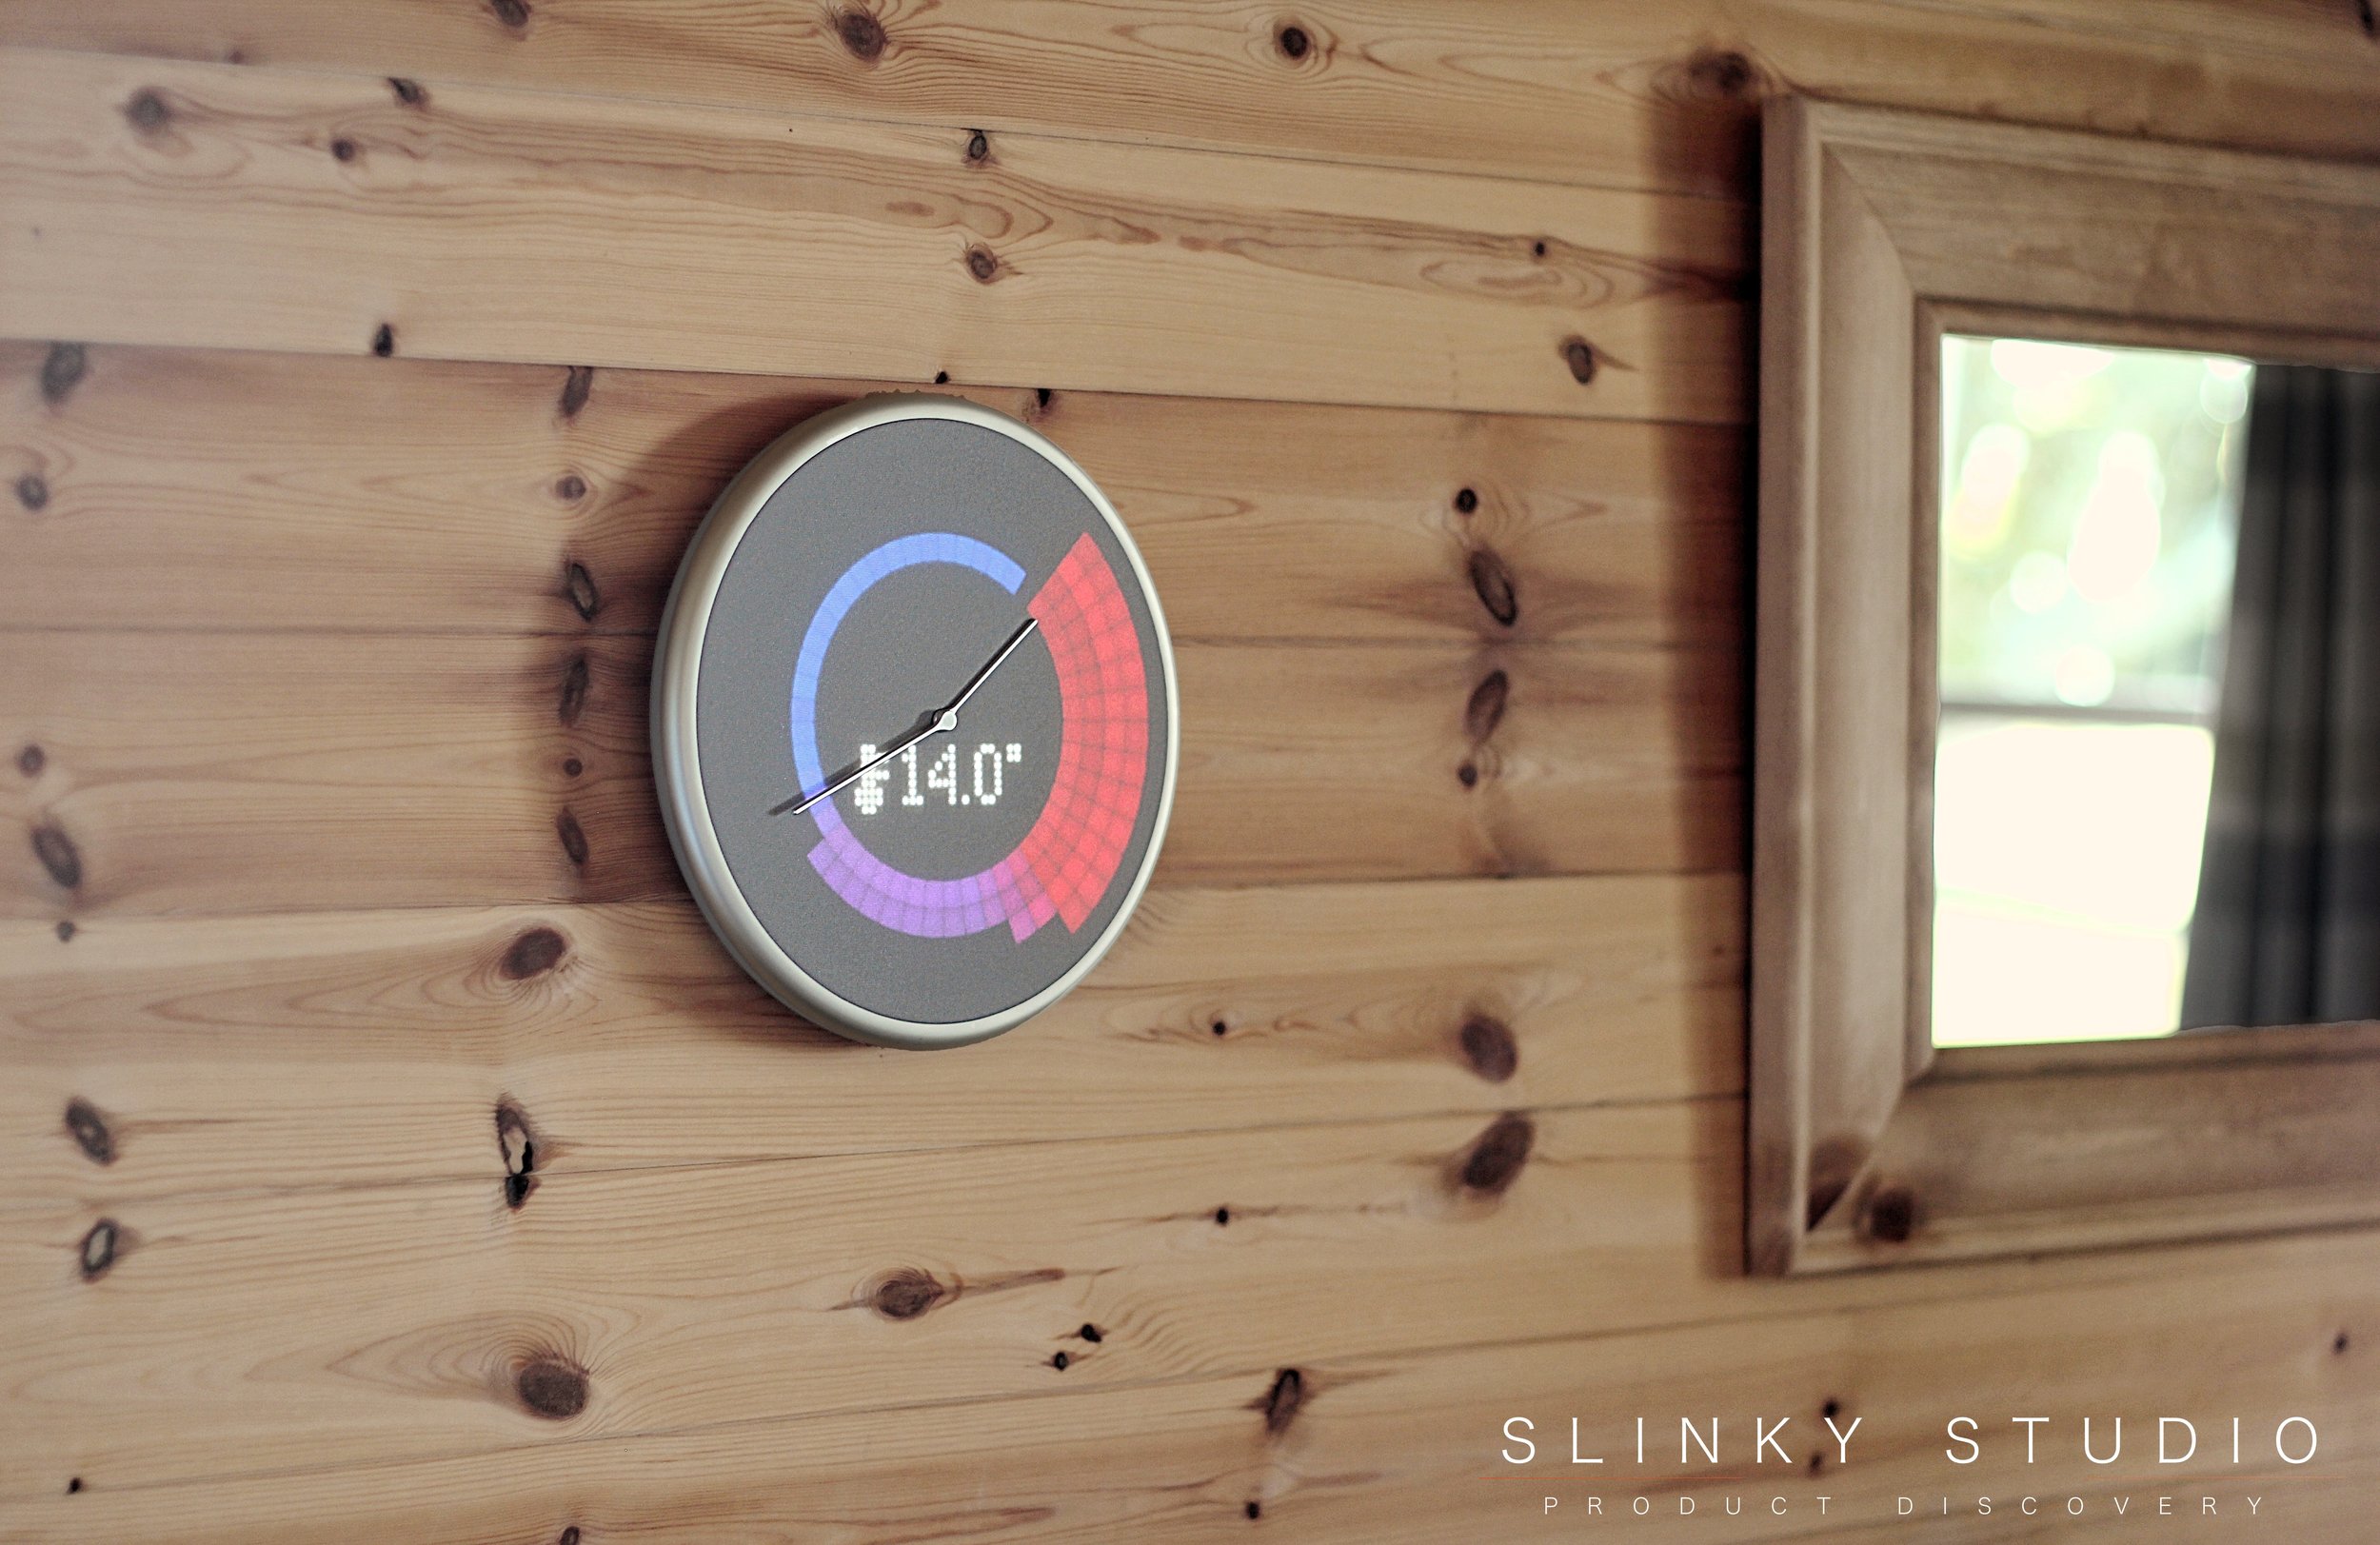 Glance Clock Hanging on Wooden Wall Weather.jpg